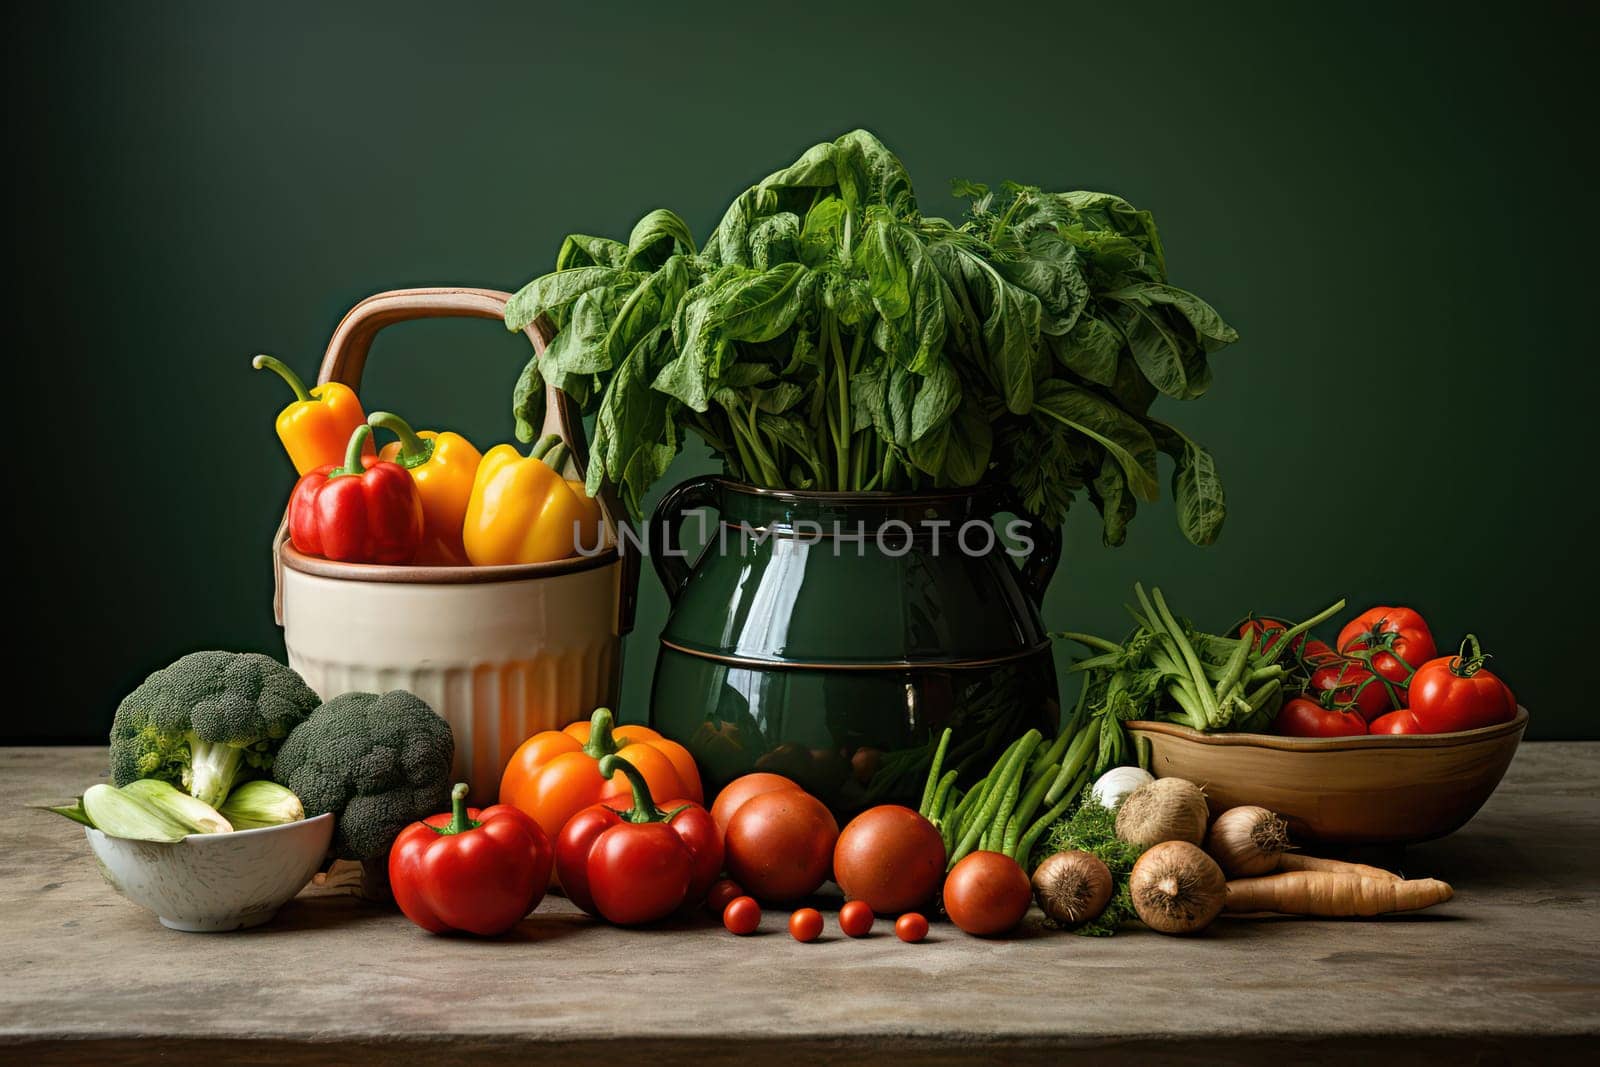 Fresh Organic Vegetable Feast on Rustic Wooden Table: A Colorful Harvest of Healthy Ingredients